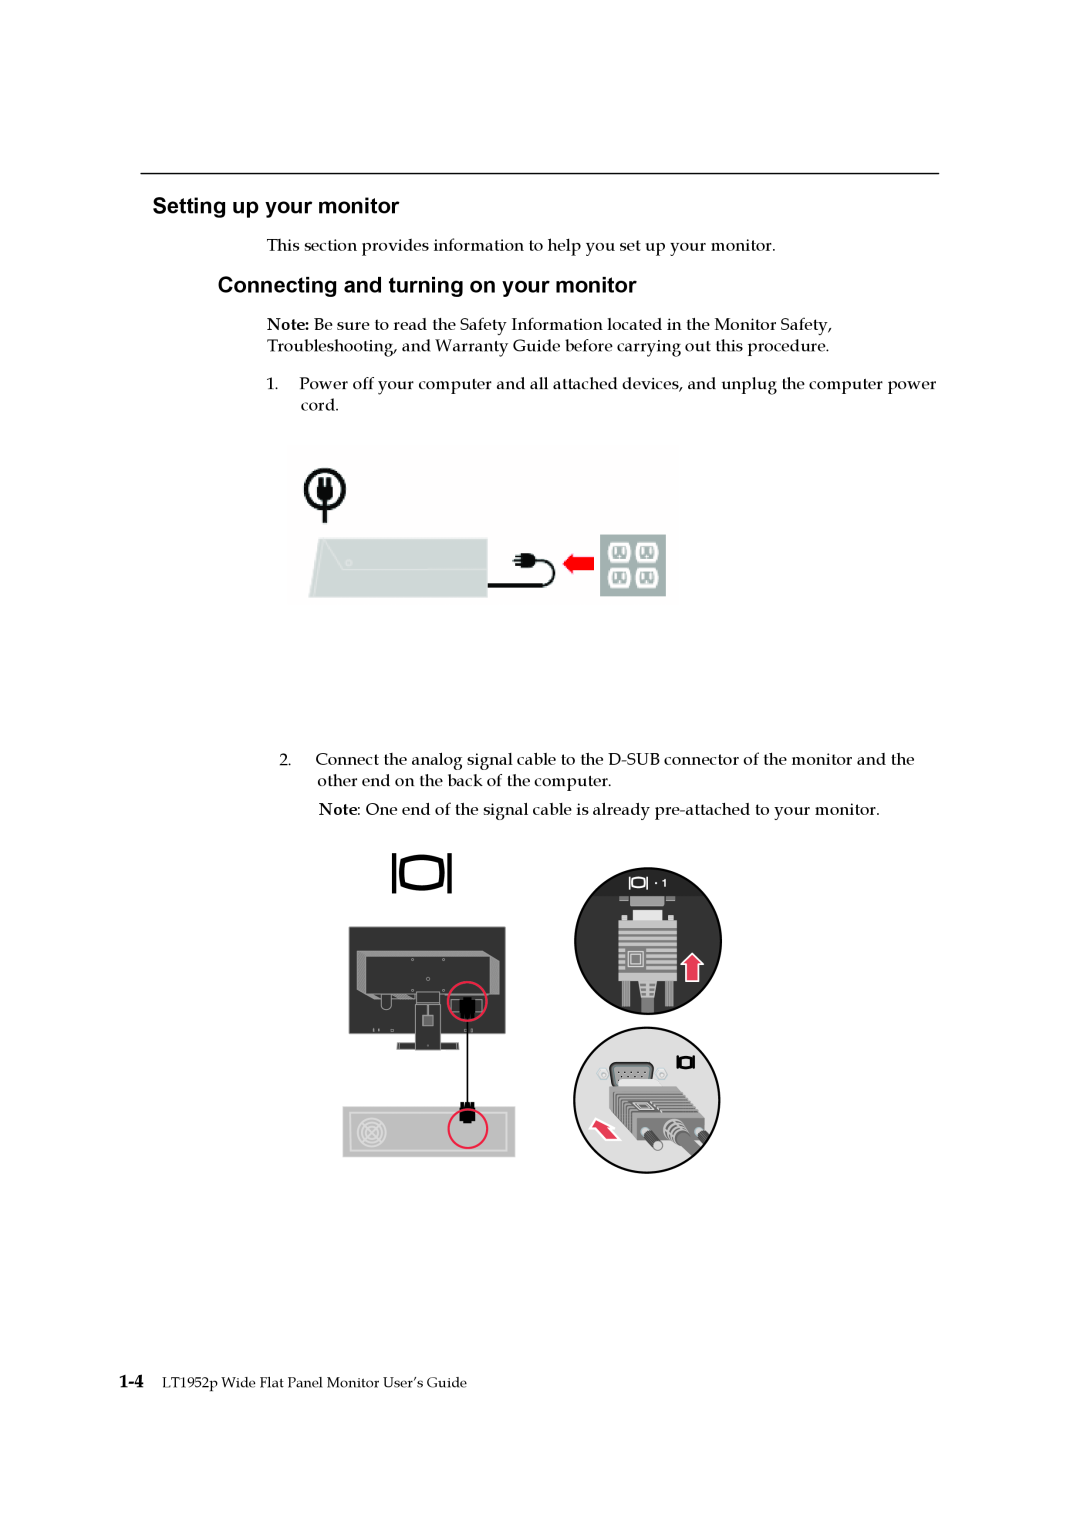 Lenovo LT1952p manual Setting up your monitor, Connecting and turning on your monitor 